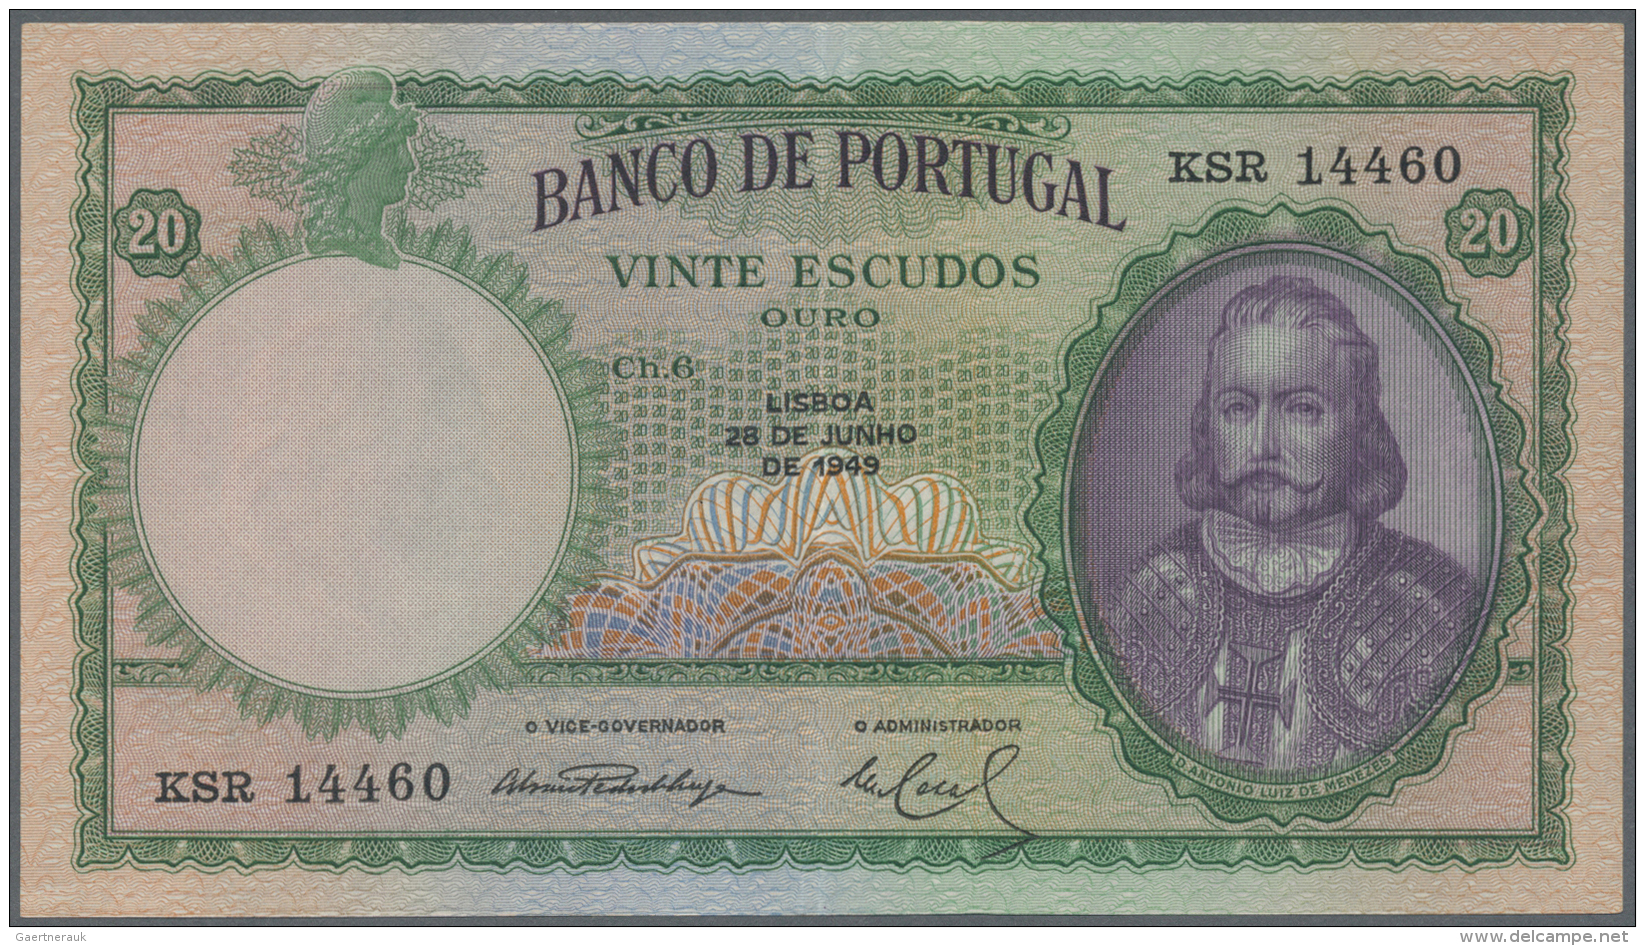 Portugal: 20 Escudos 1949 P. 153a, Only A Center Fold, No Holes Or Tears, Crisp Original Paper And Bright Colors, Condit - Portugal